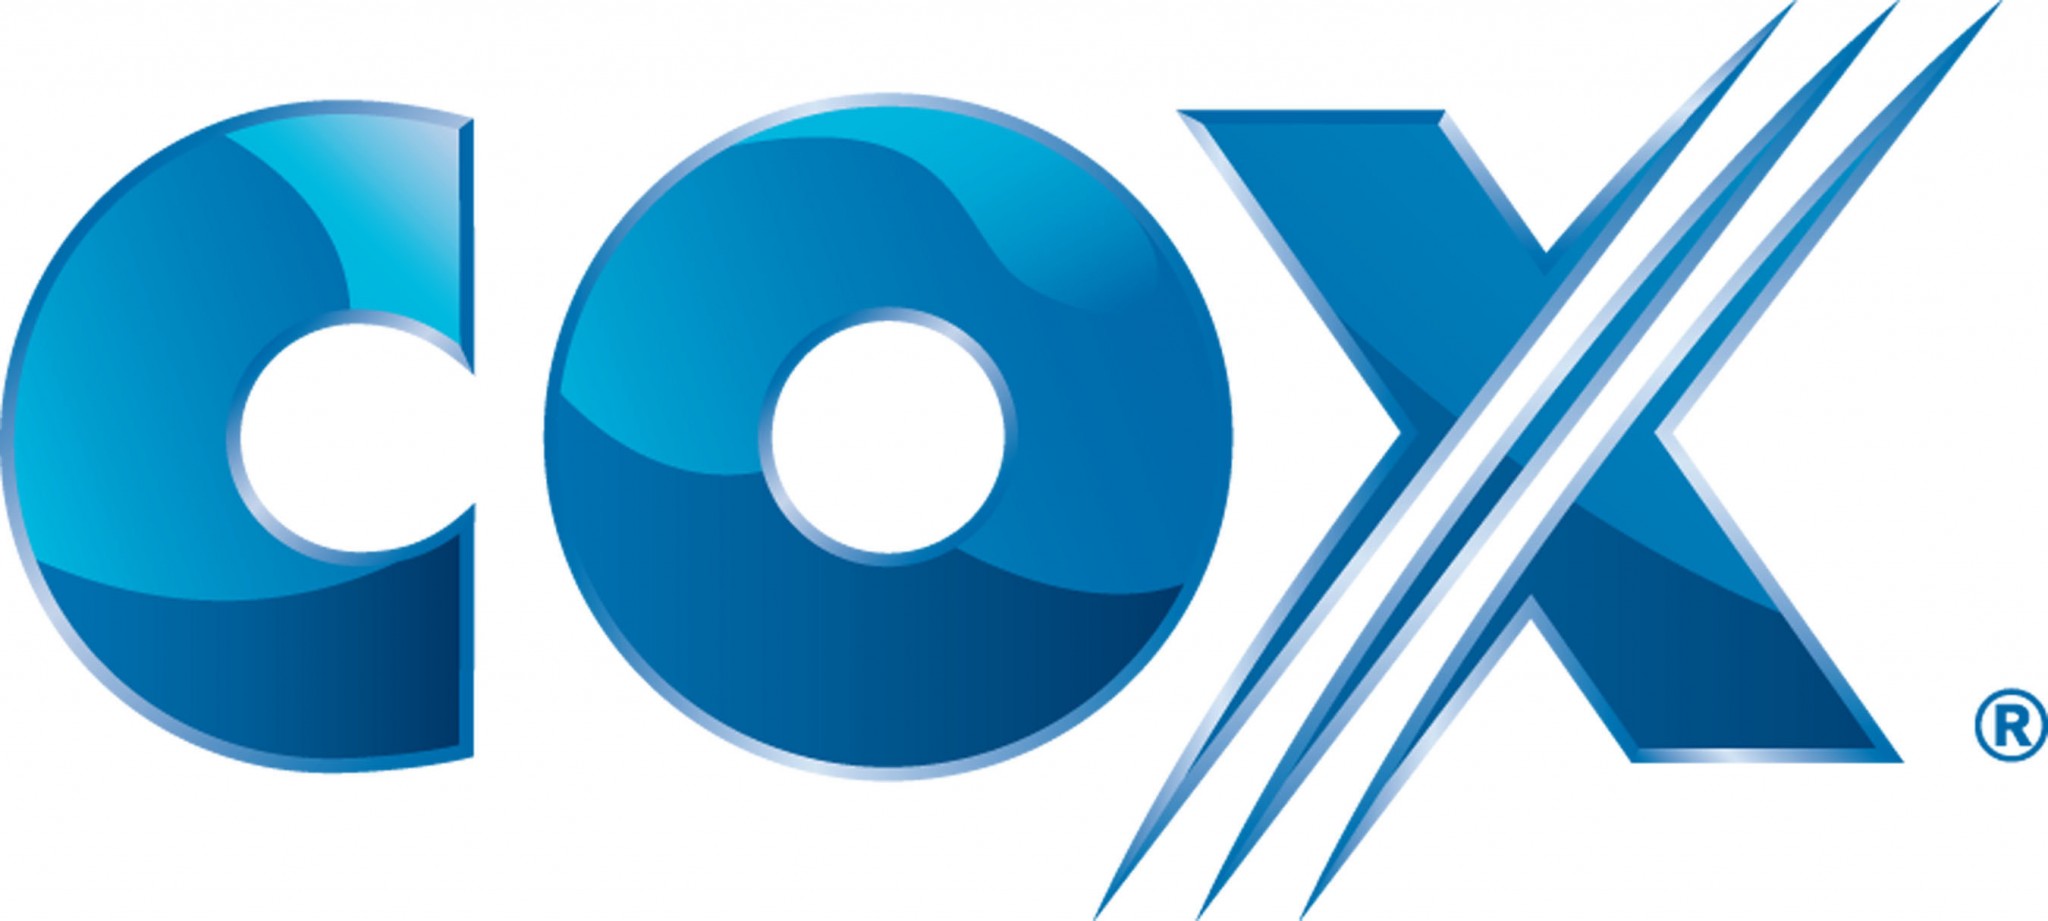 Cox Will Pay $1 Billion in Piracy Damages, Court Confirms